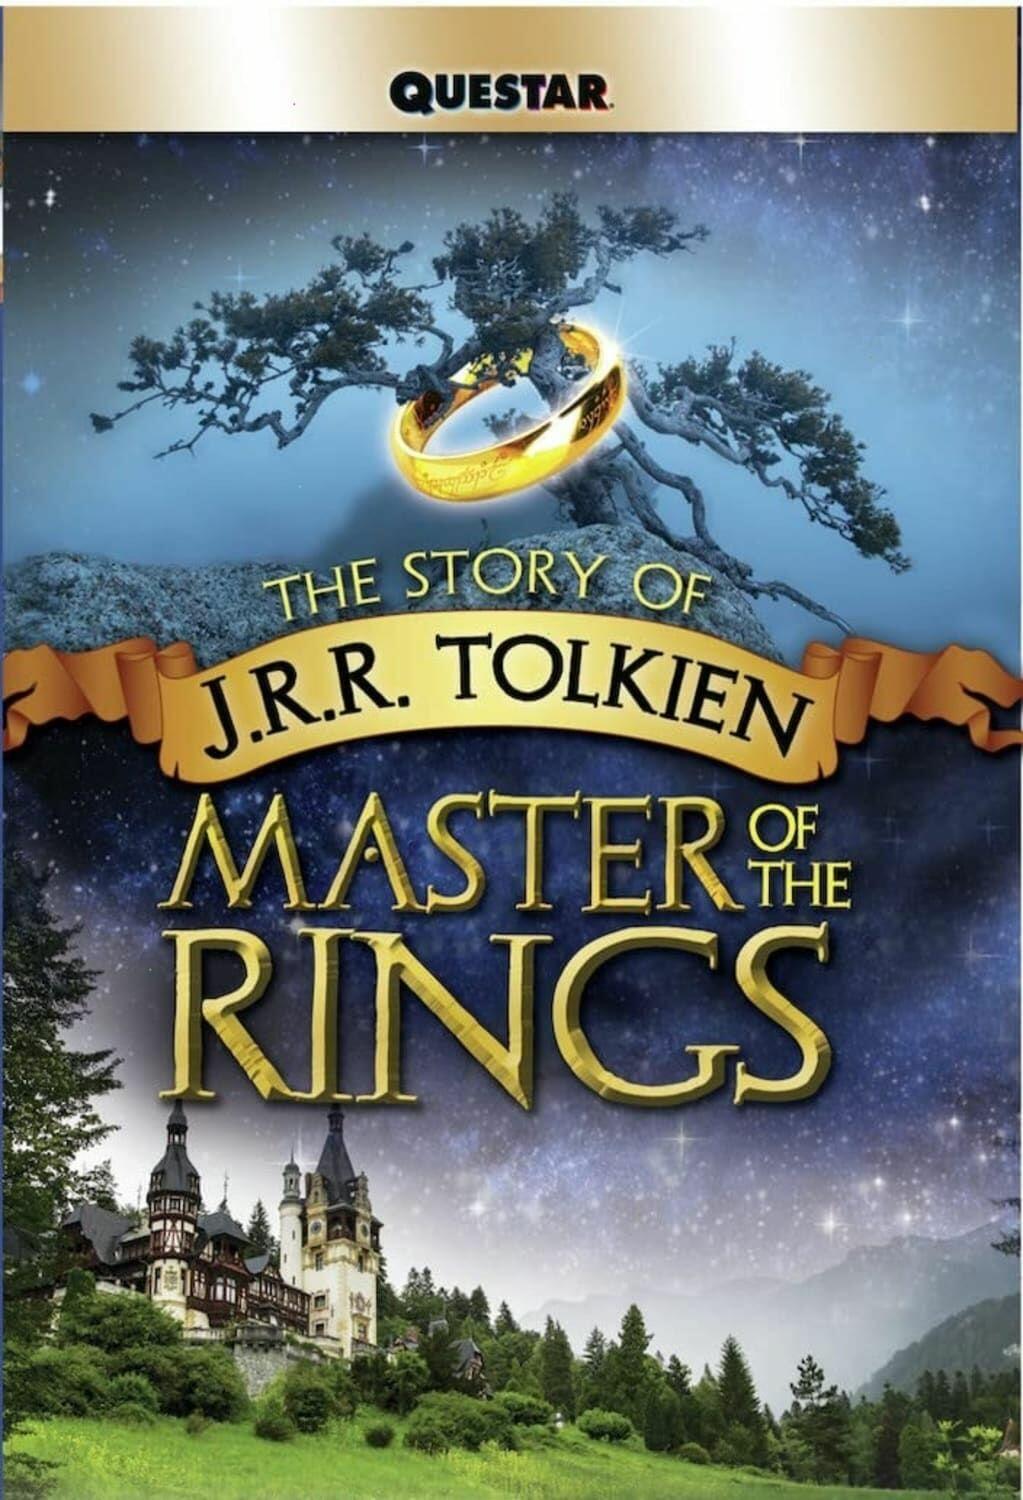 The Story of J.R.R. Tolkien: Master of the Rings (DVD)